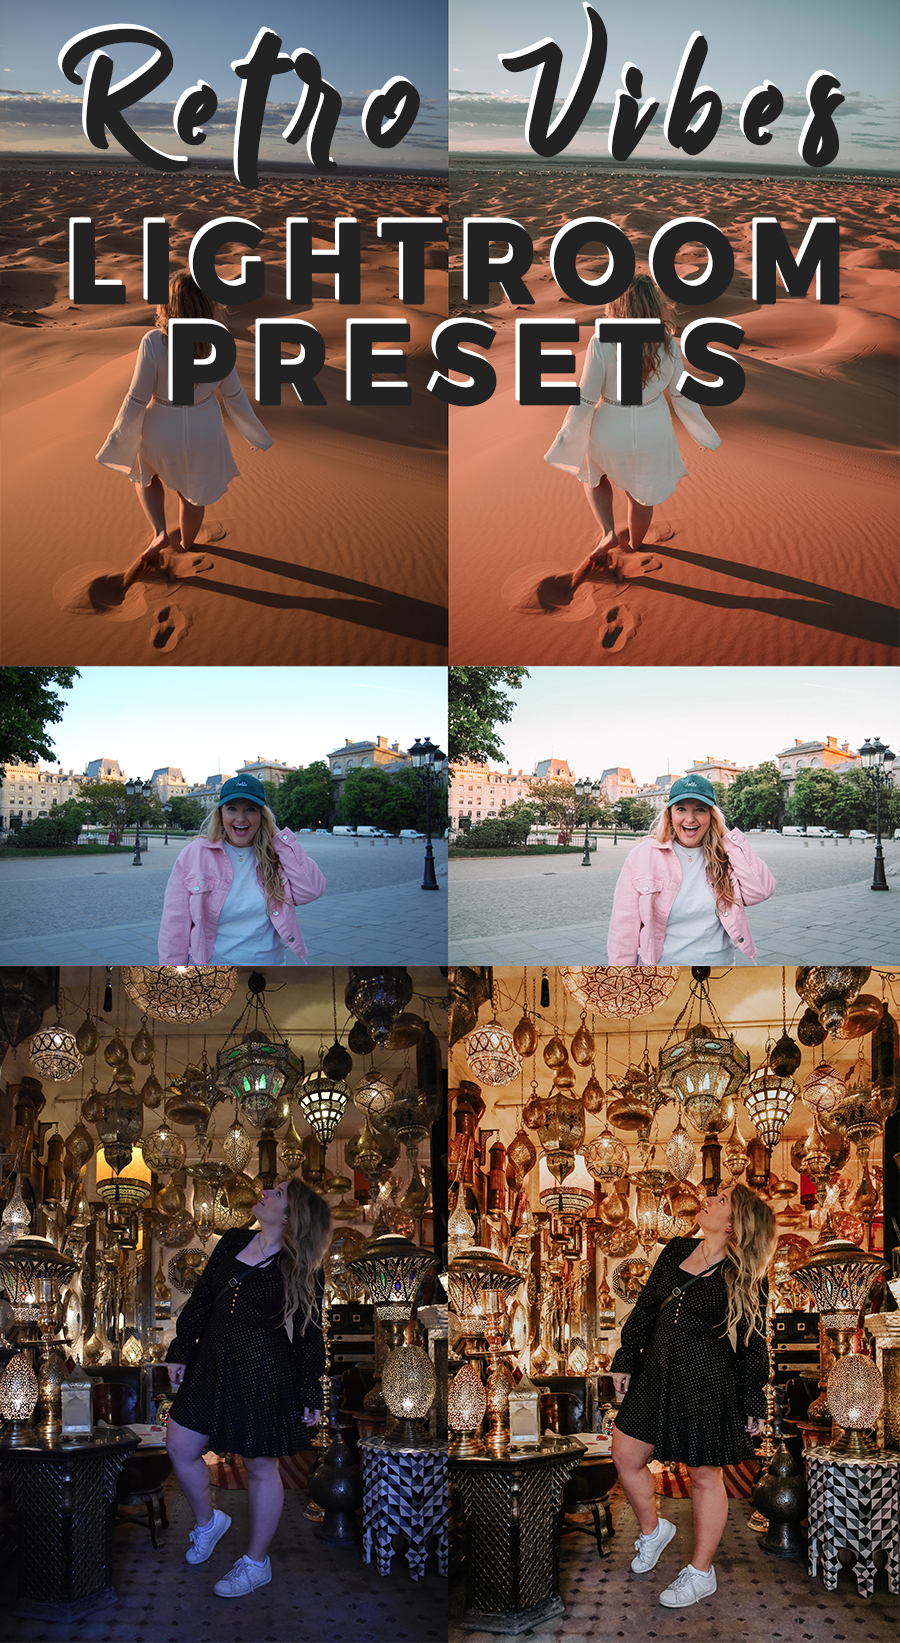 save - 5 free lightroom instagram presets and how to use them